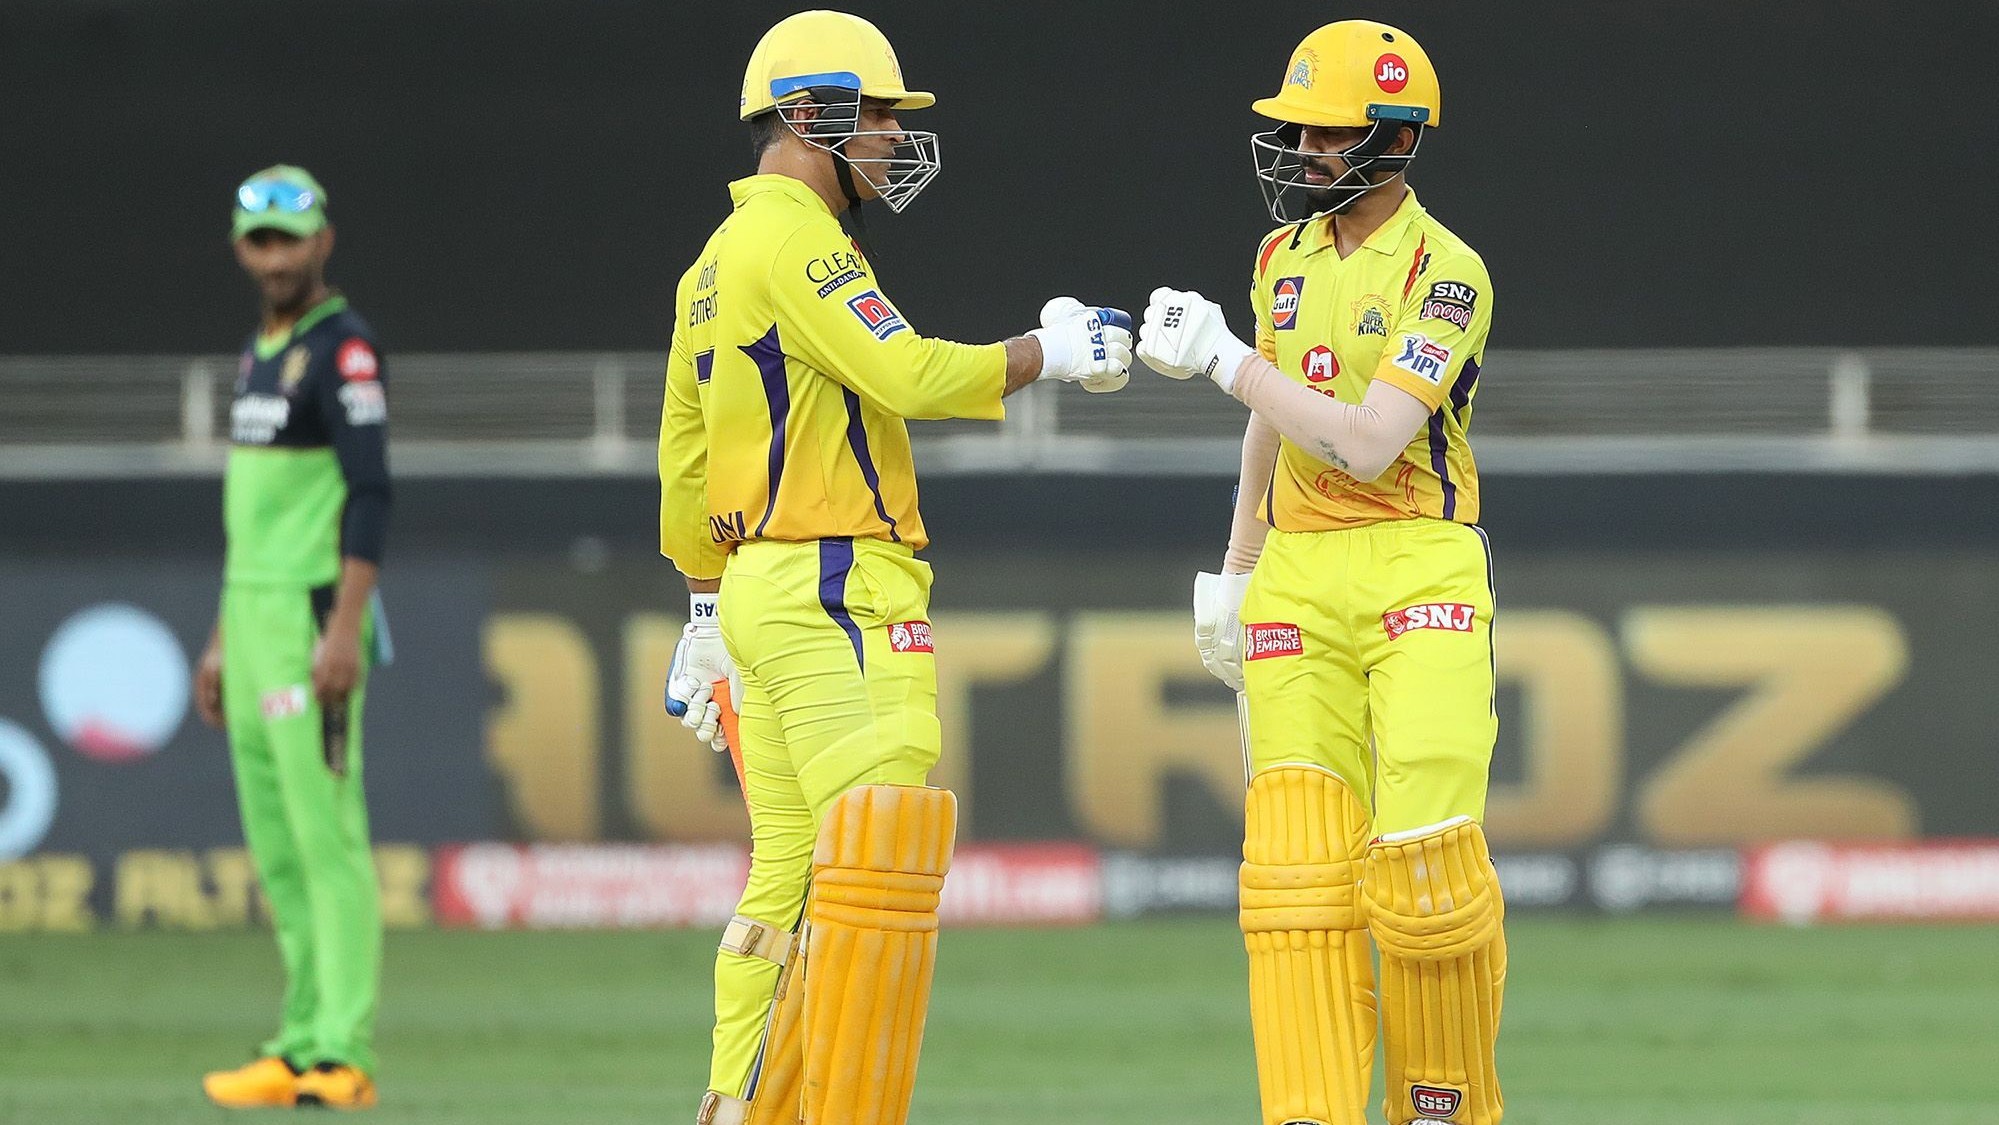 IPL 2020: Ruturaj Gaikwad reveals how a chat with MS Dhoni changed his thought process